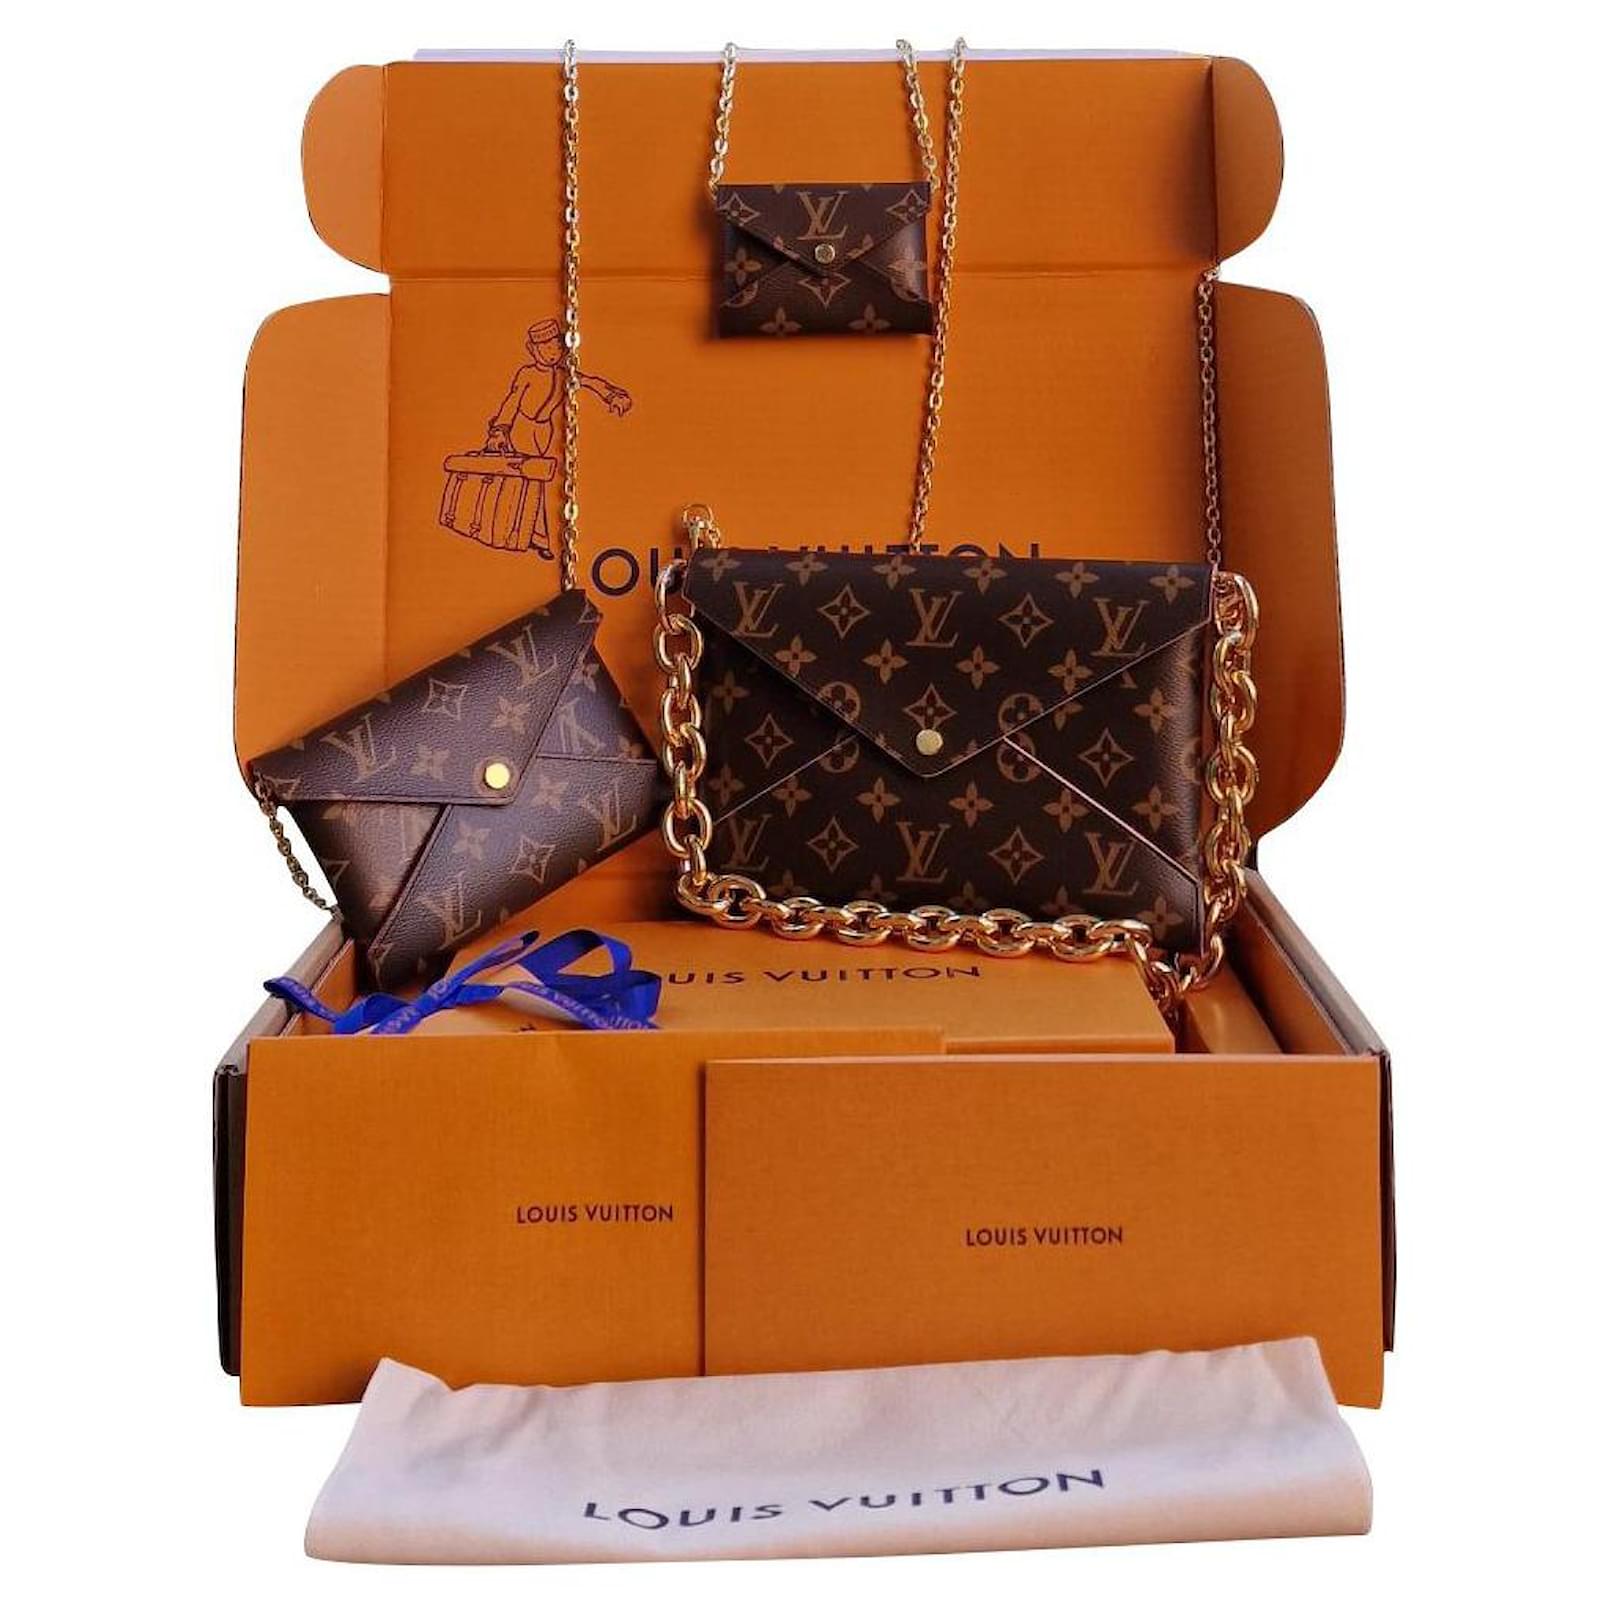 Louis Vuitton Pochette Kirigami  What can fits inside and How to